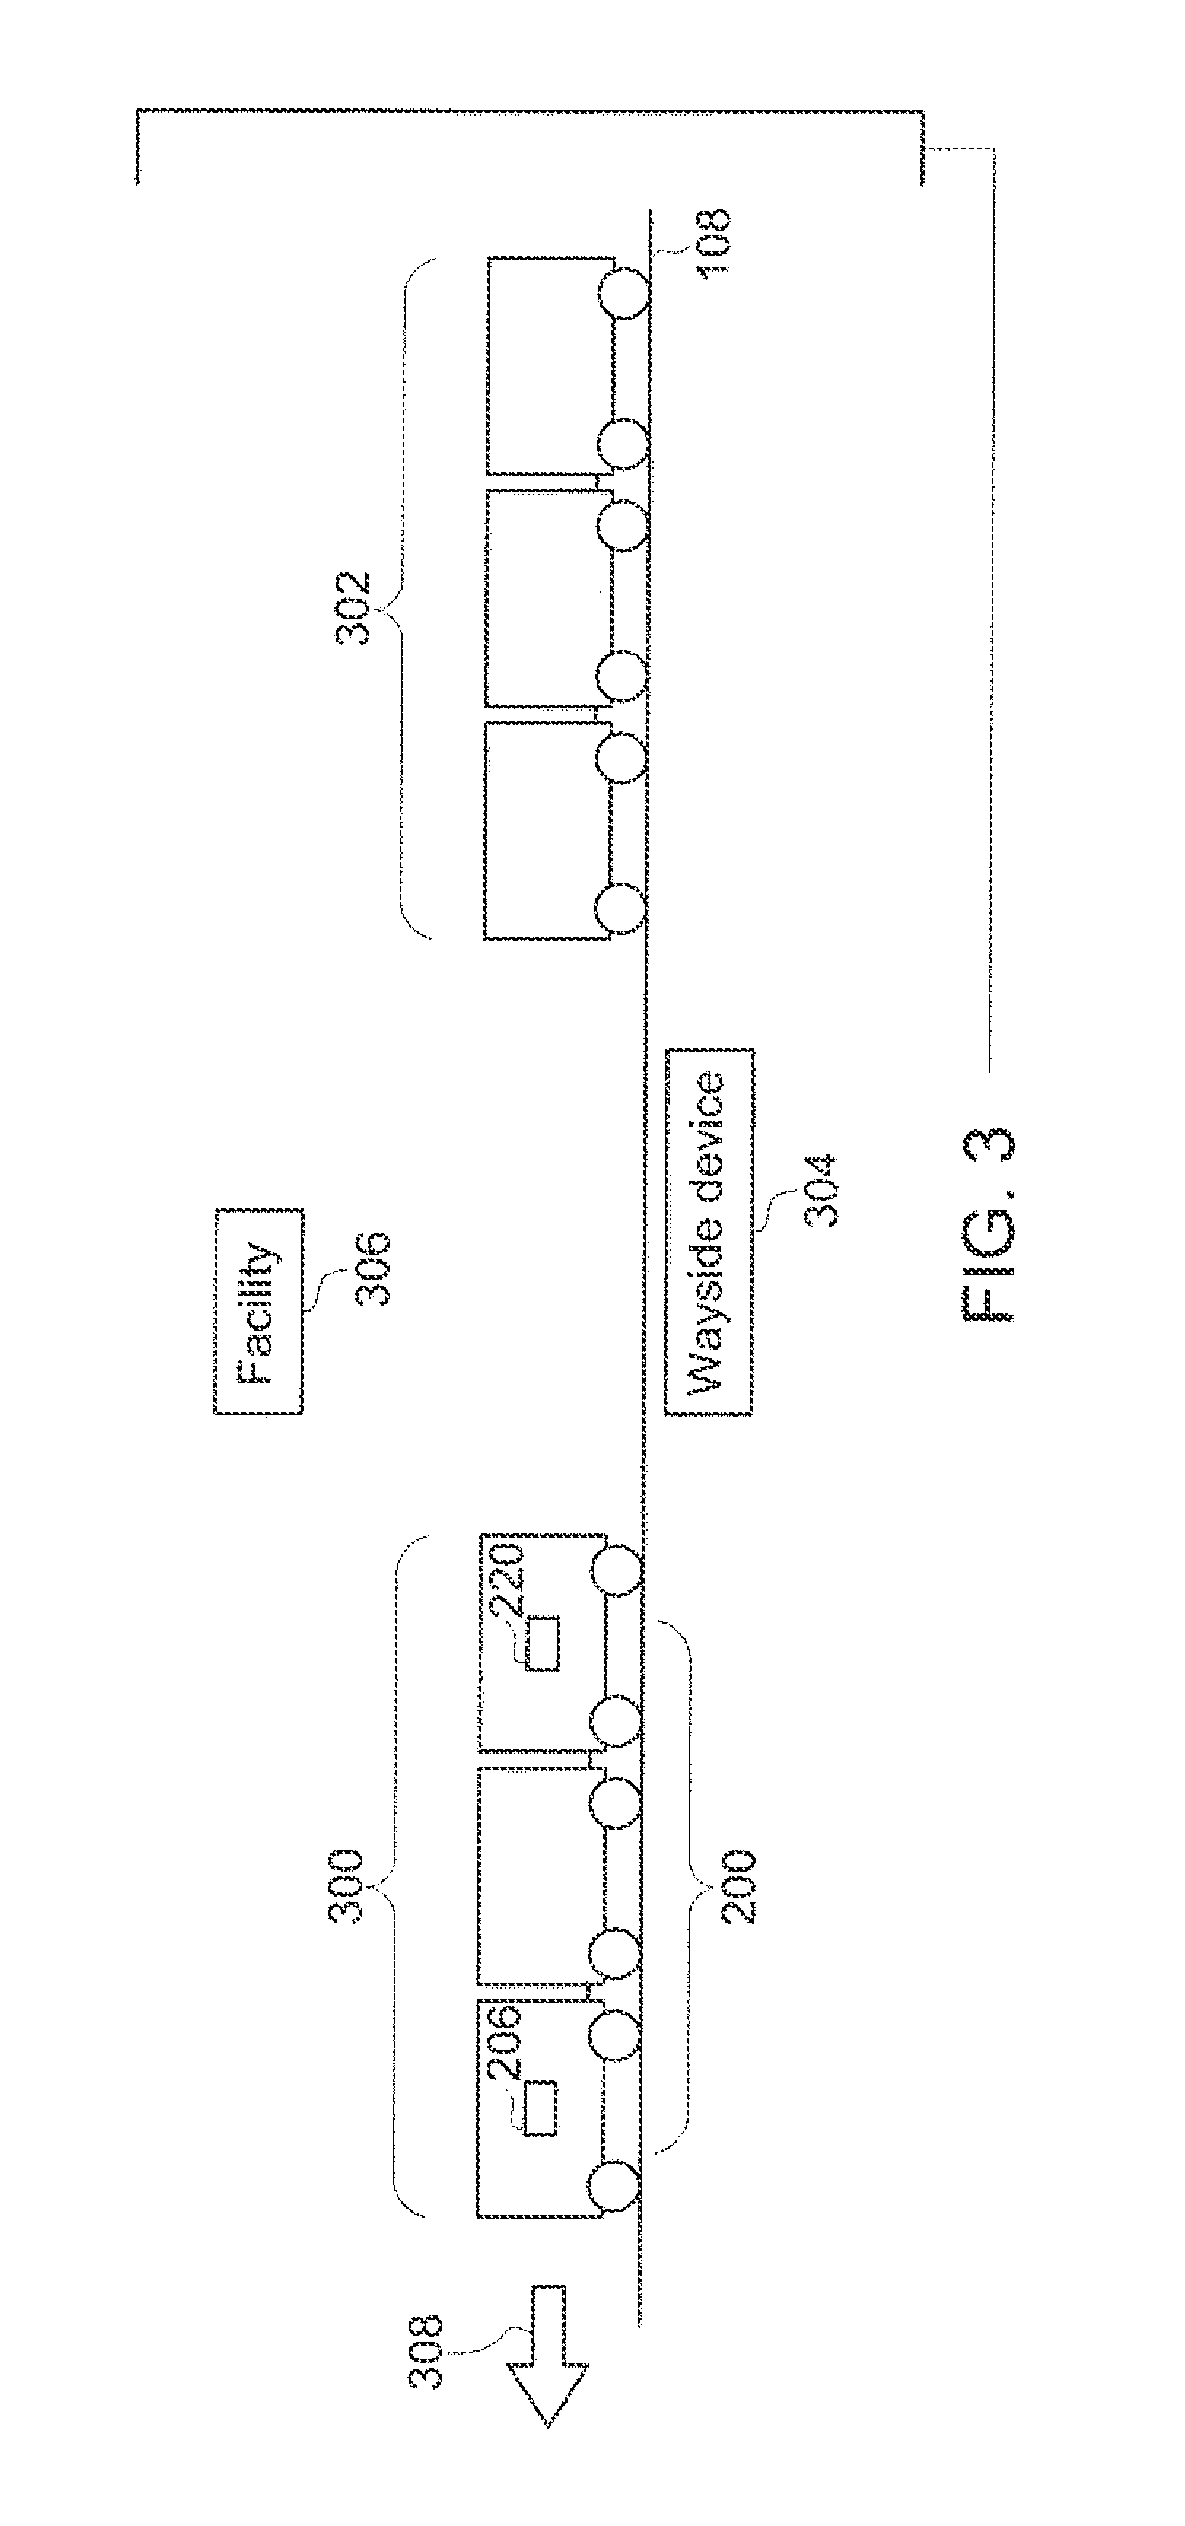 Route examining system and method